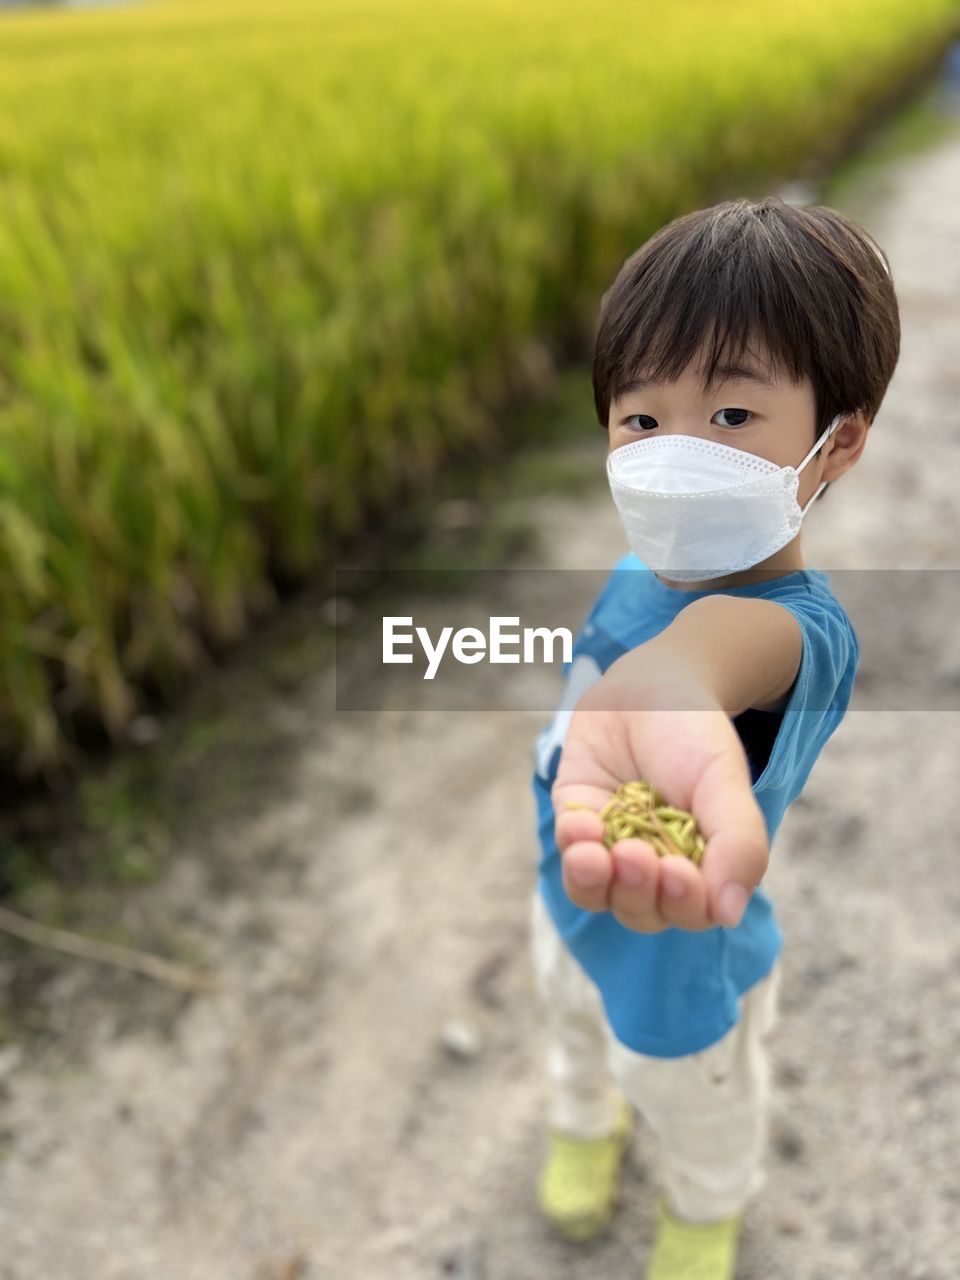 childhood, child, one person, toddler, cute, nature, green, plant, men, portrait, full length, innocence, baby, agriculture, outdoors, land, food and drink, environment, holding, dirt, field, landscape, food, rural scene, day, grass, person, looking at camera, casual clothing, yellow